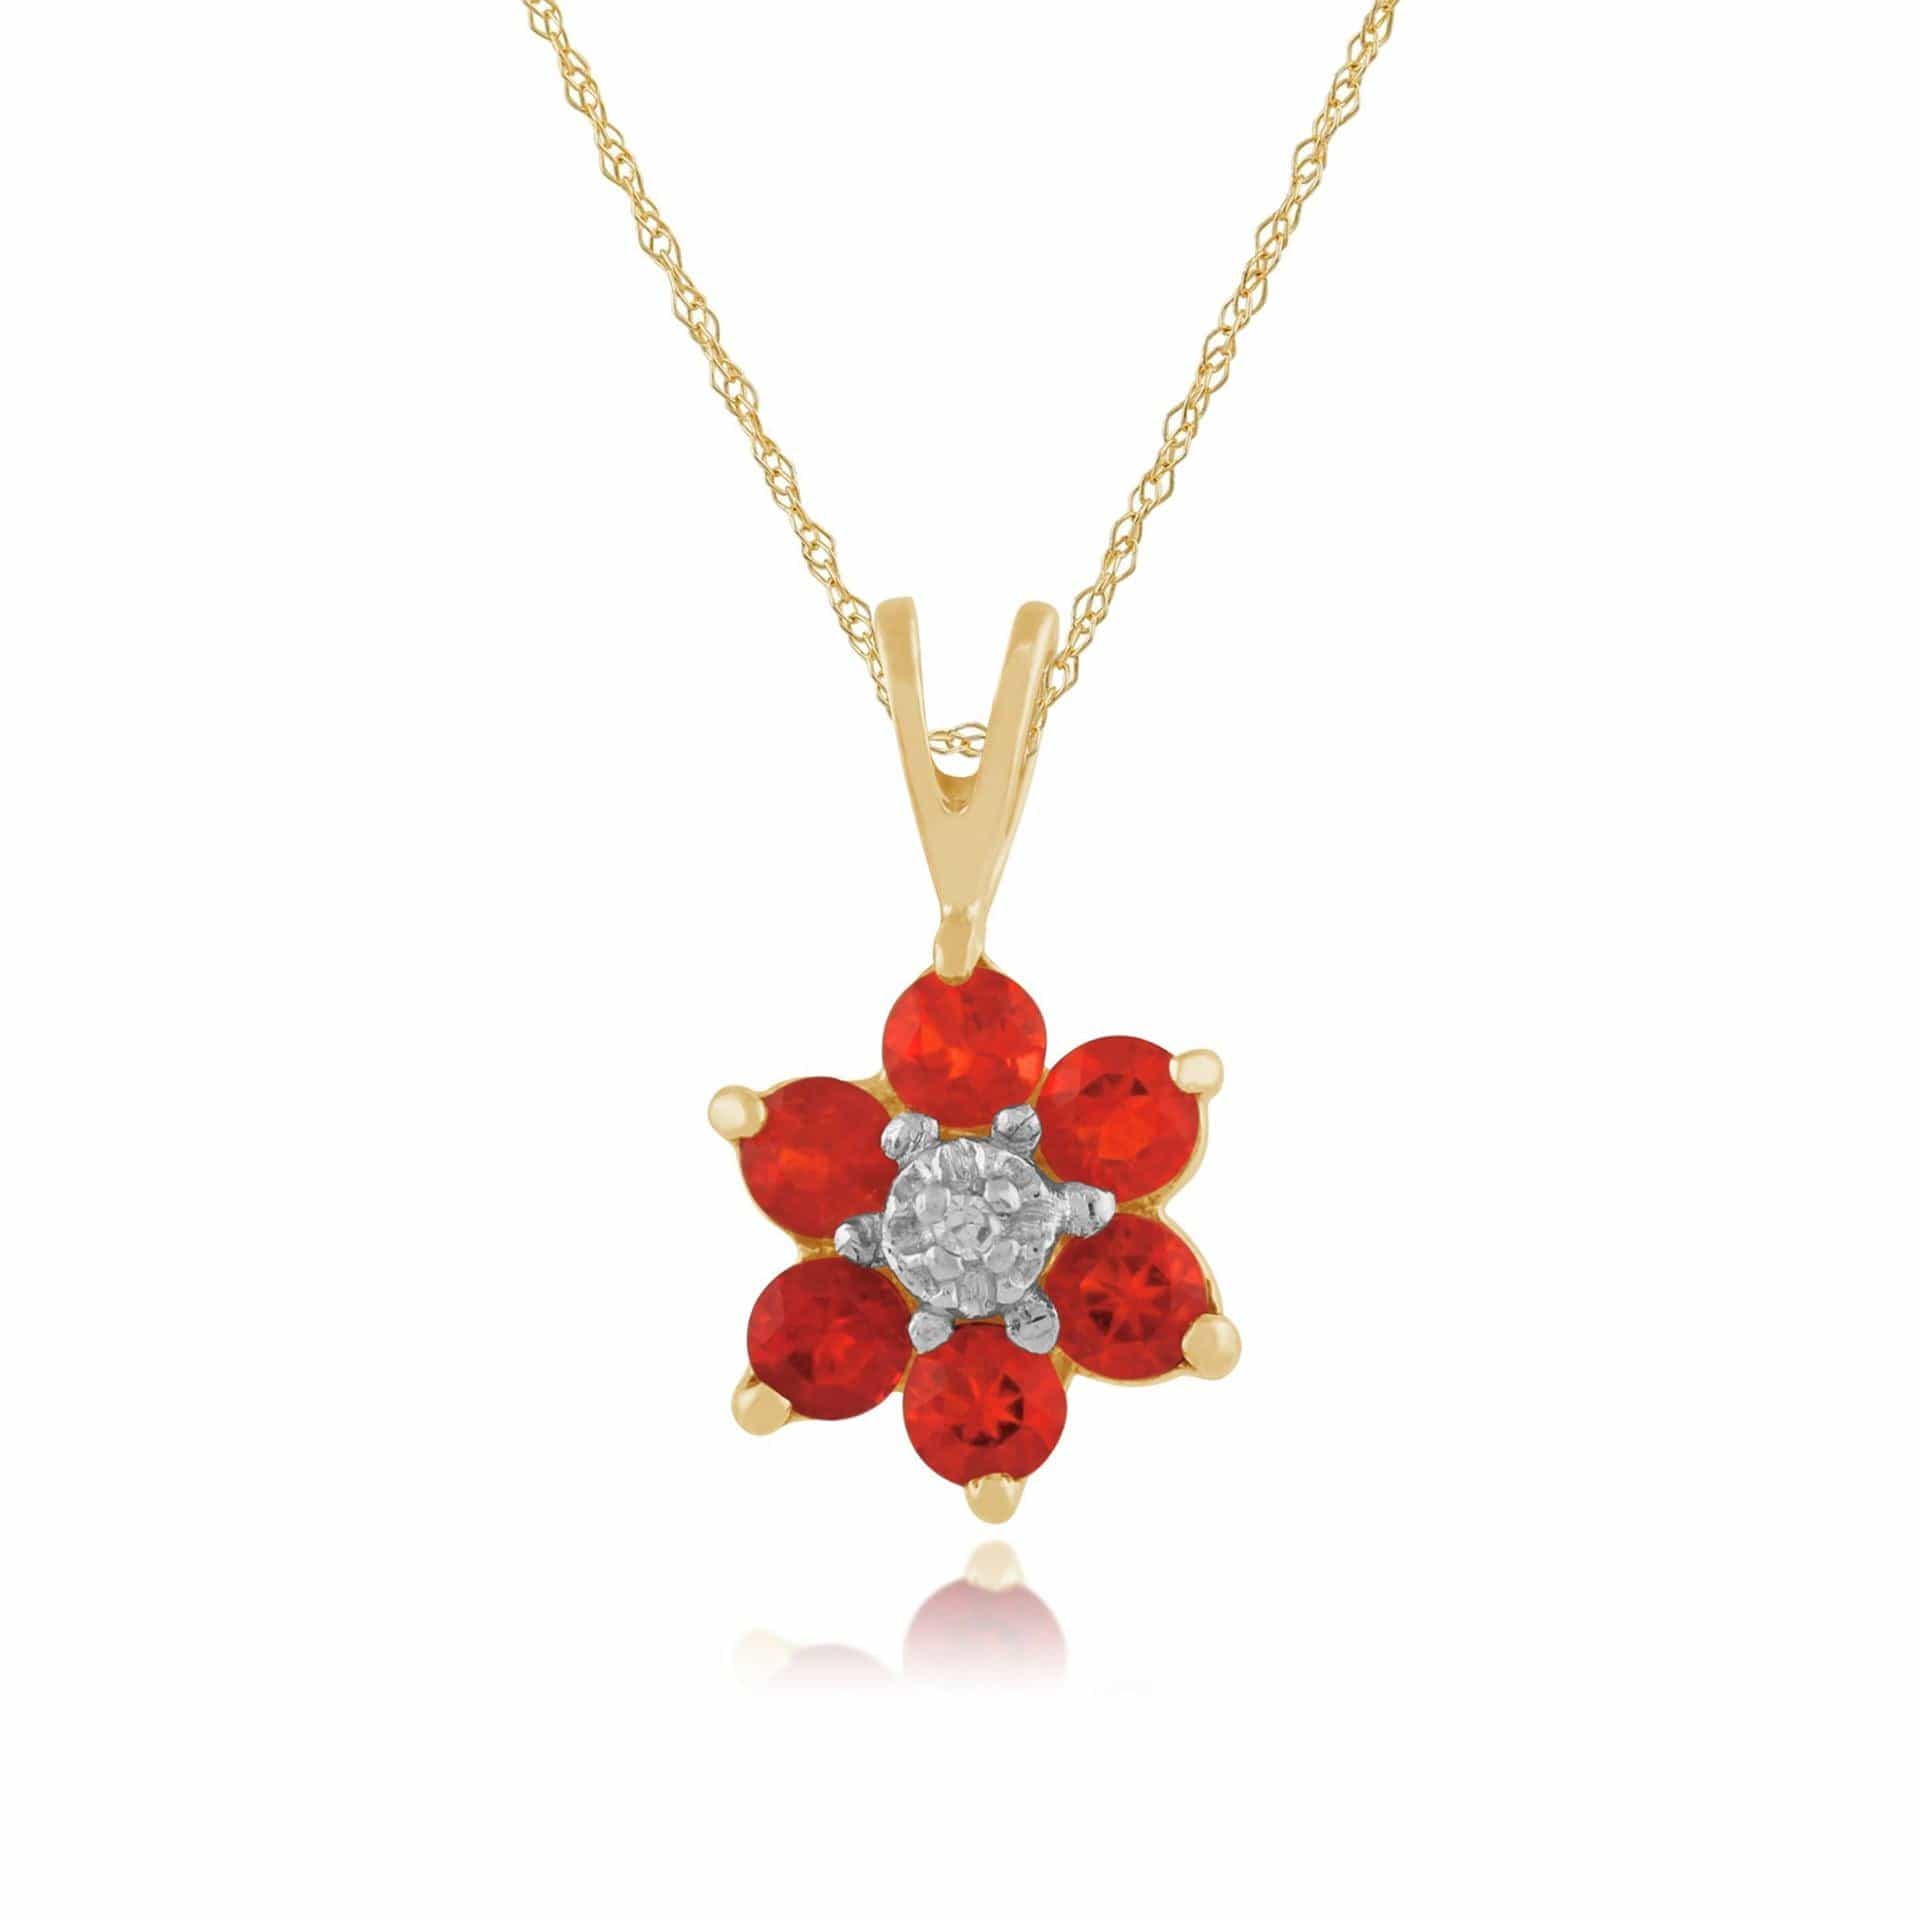 Floral Fire Opal & Diamond Clyster Pendant on Chain Image 1